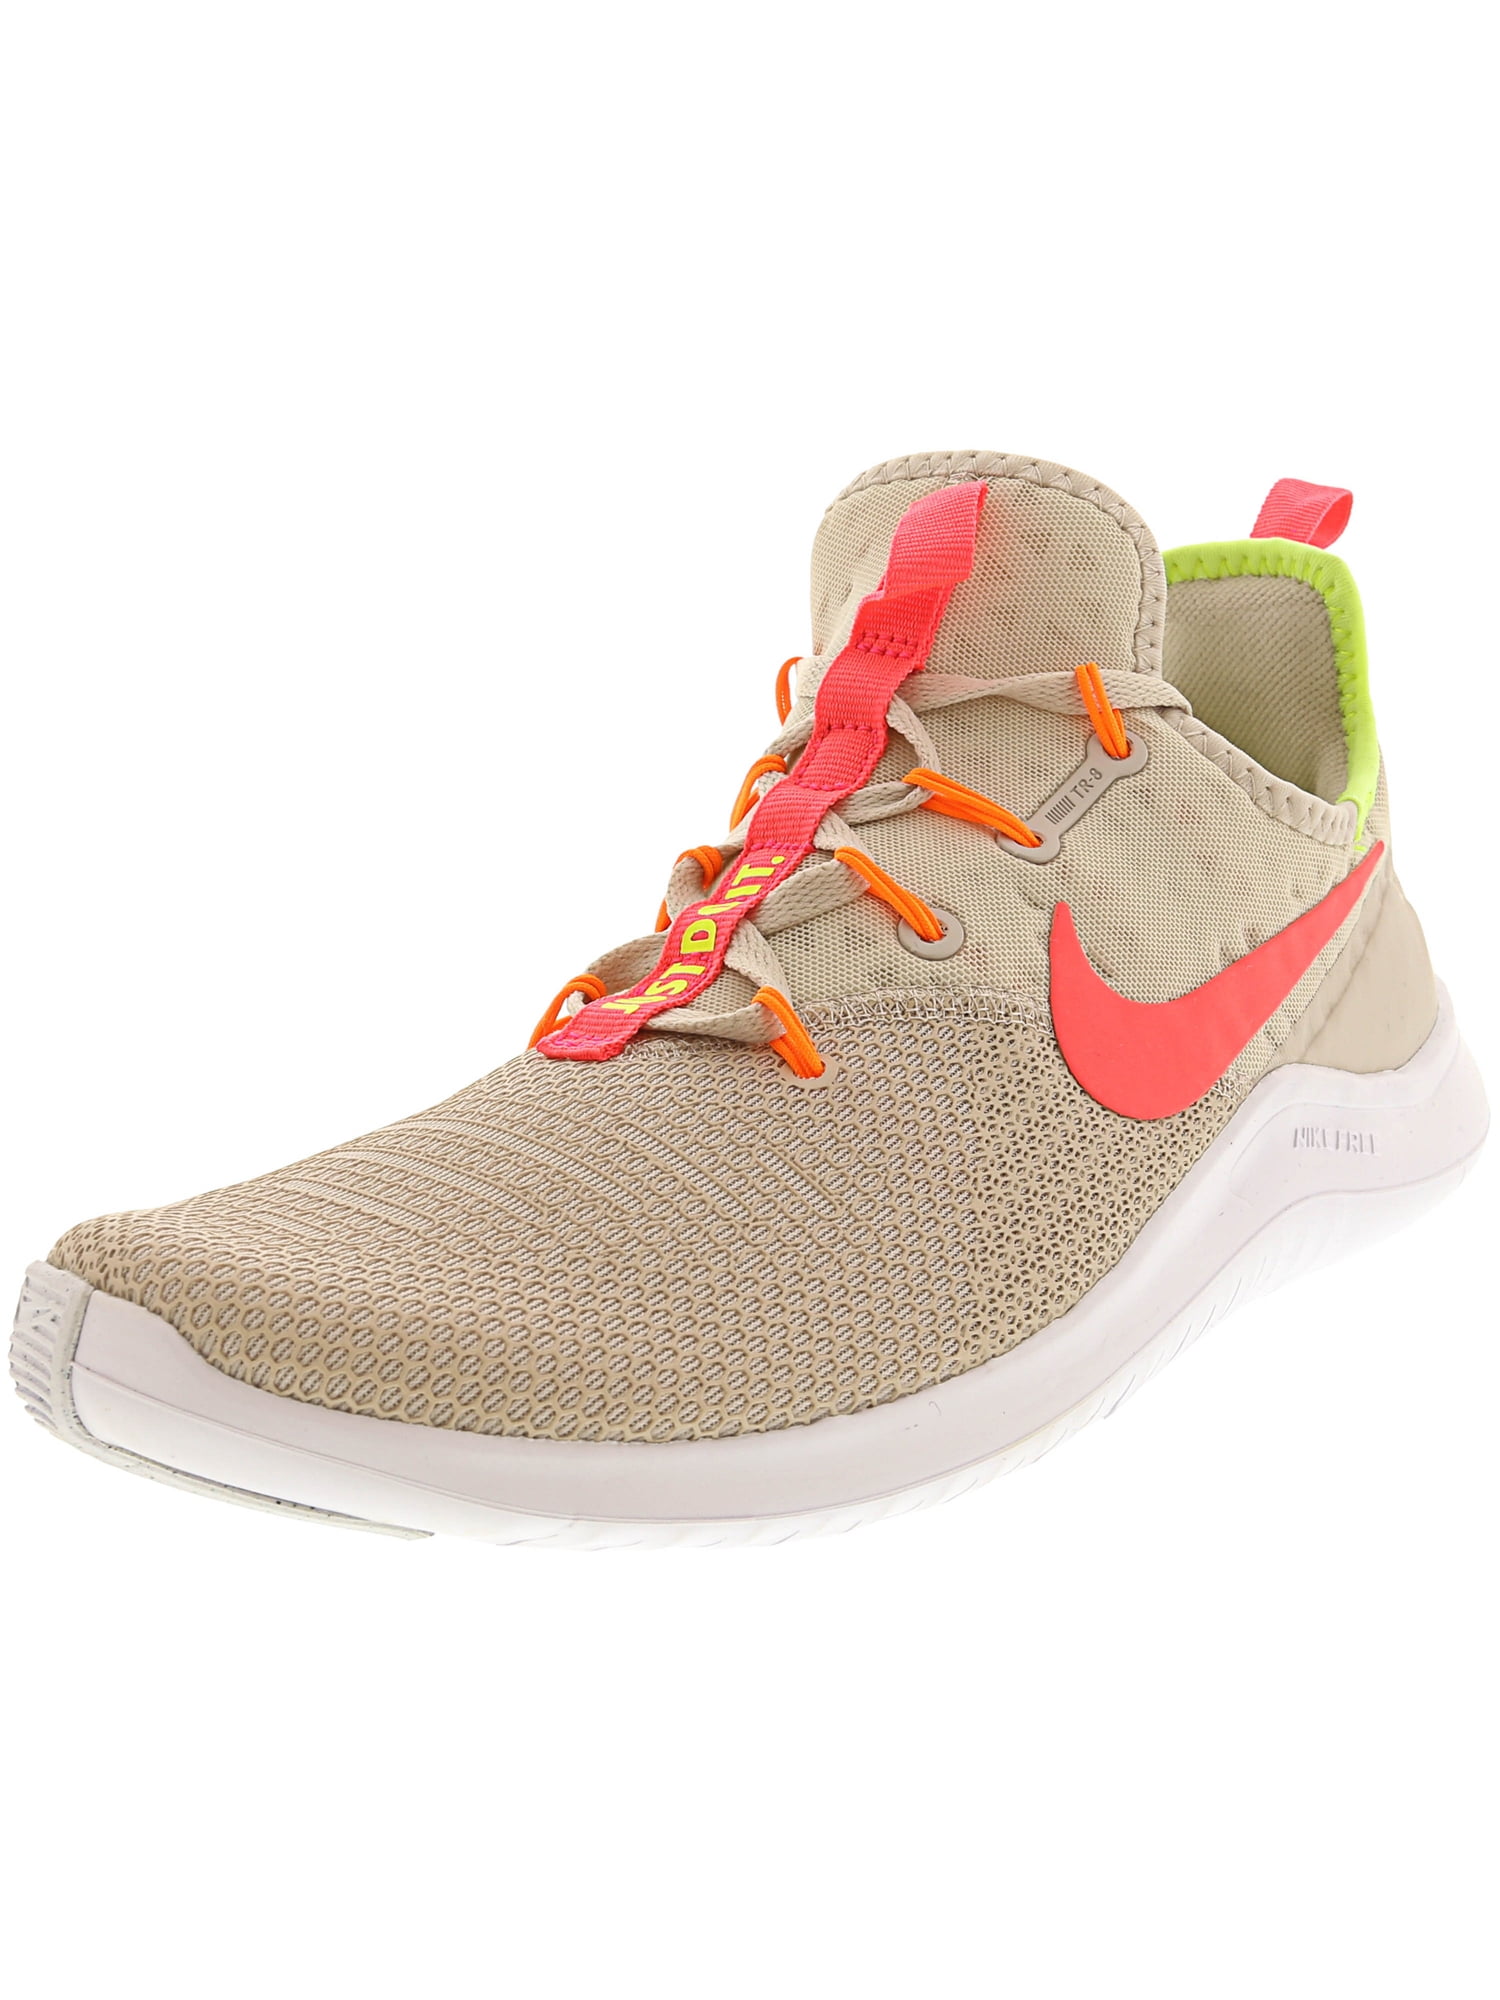 nike women's ankle shoes